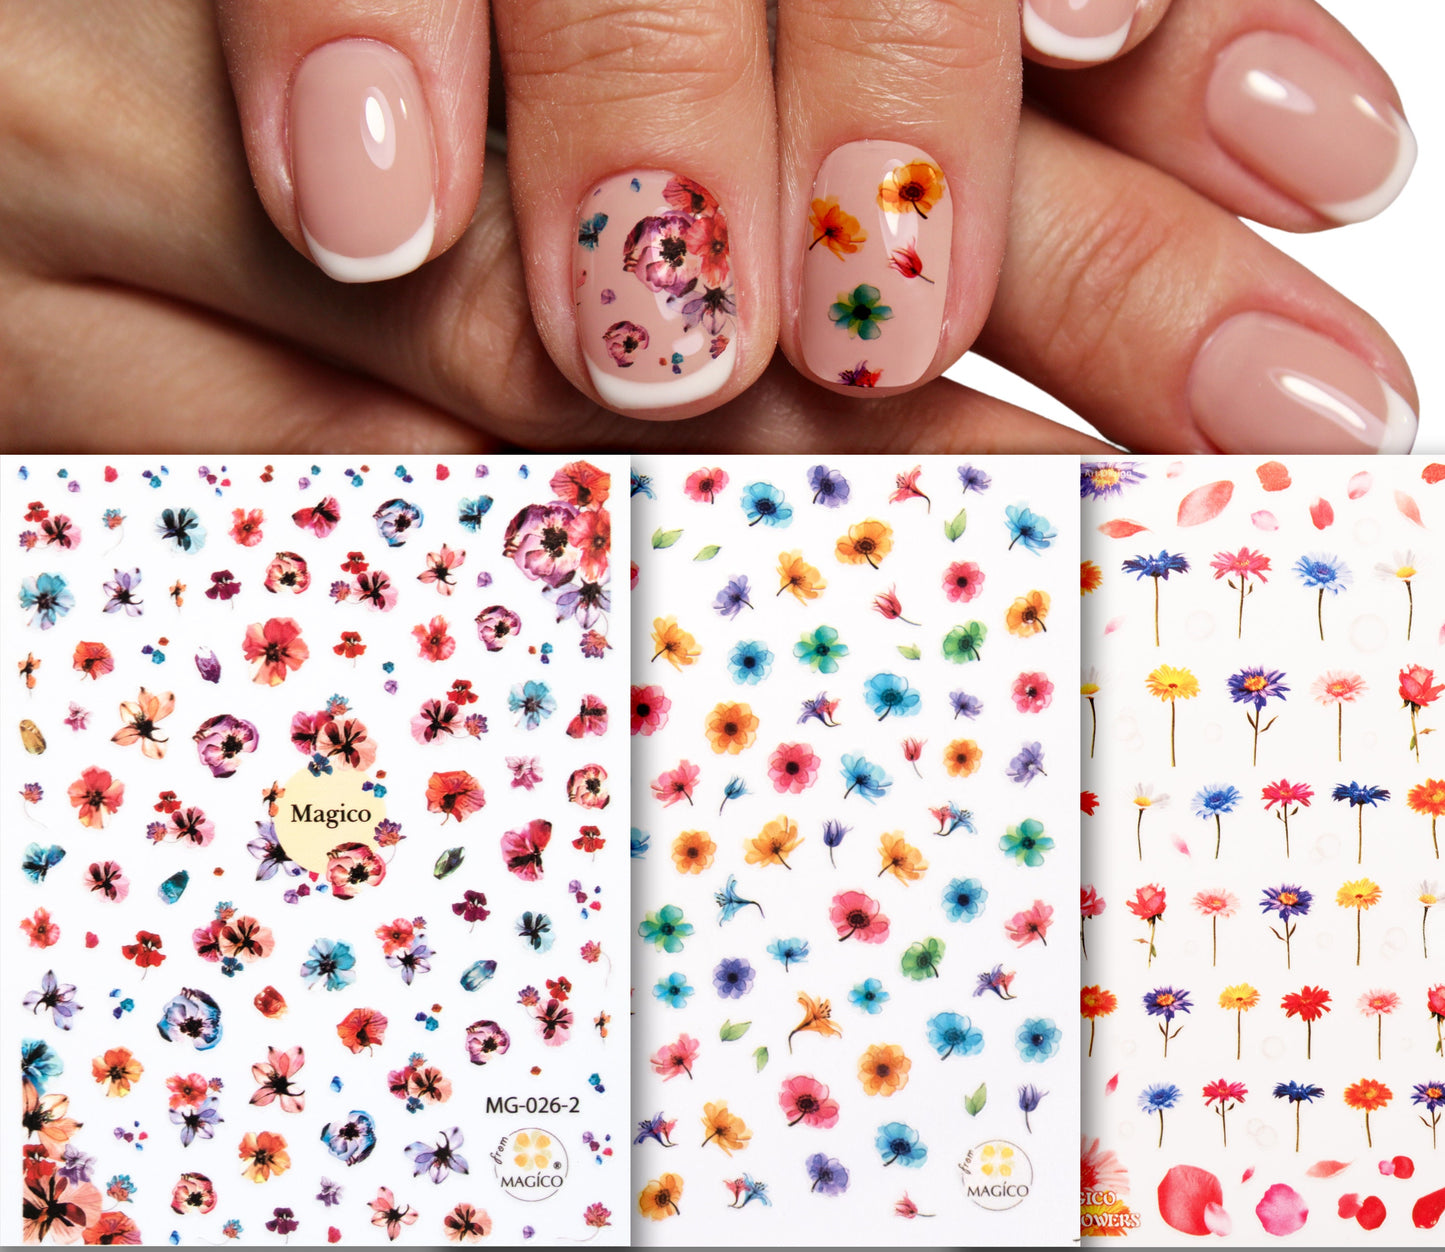 Floral Nail Art Sticker/ Semi-permeable dyed roses DIY Tips peel off Stickers/ Pink sakura flower Sticker/ plum blossom manicure stencil